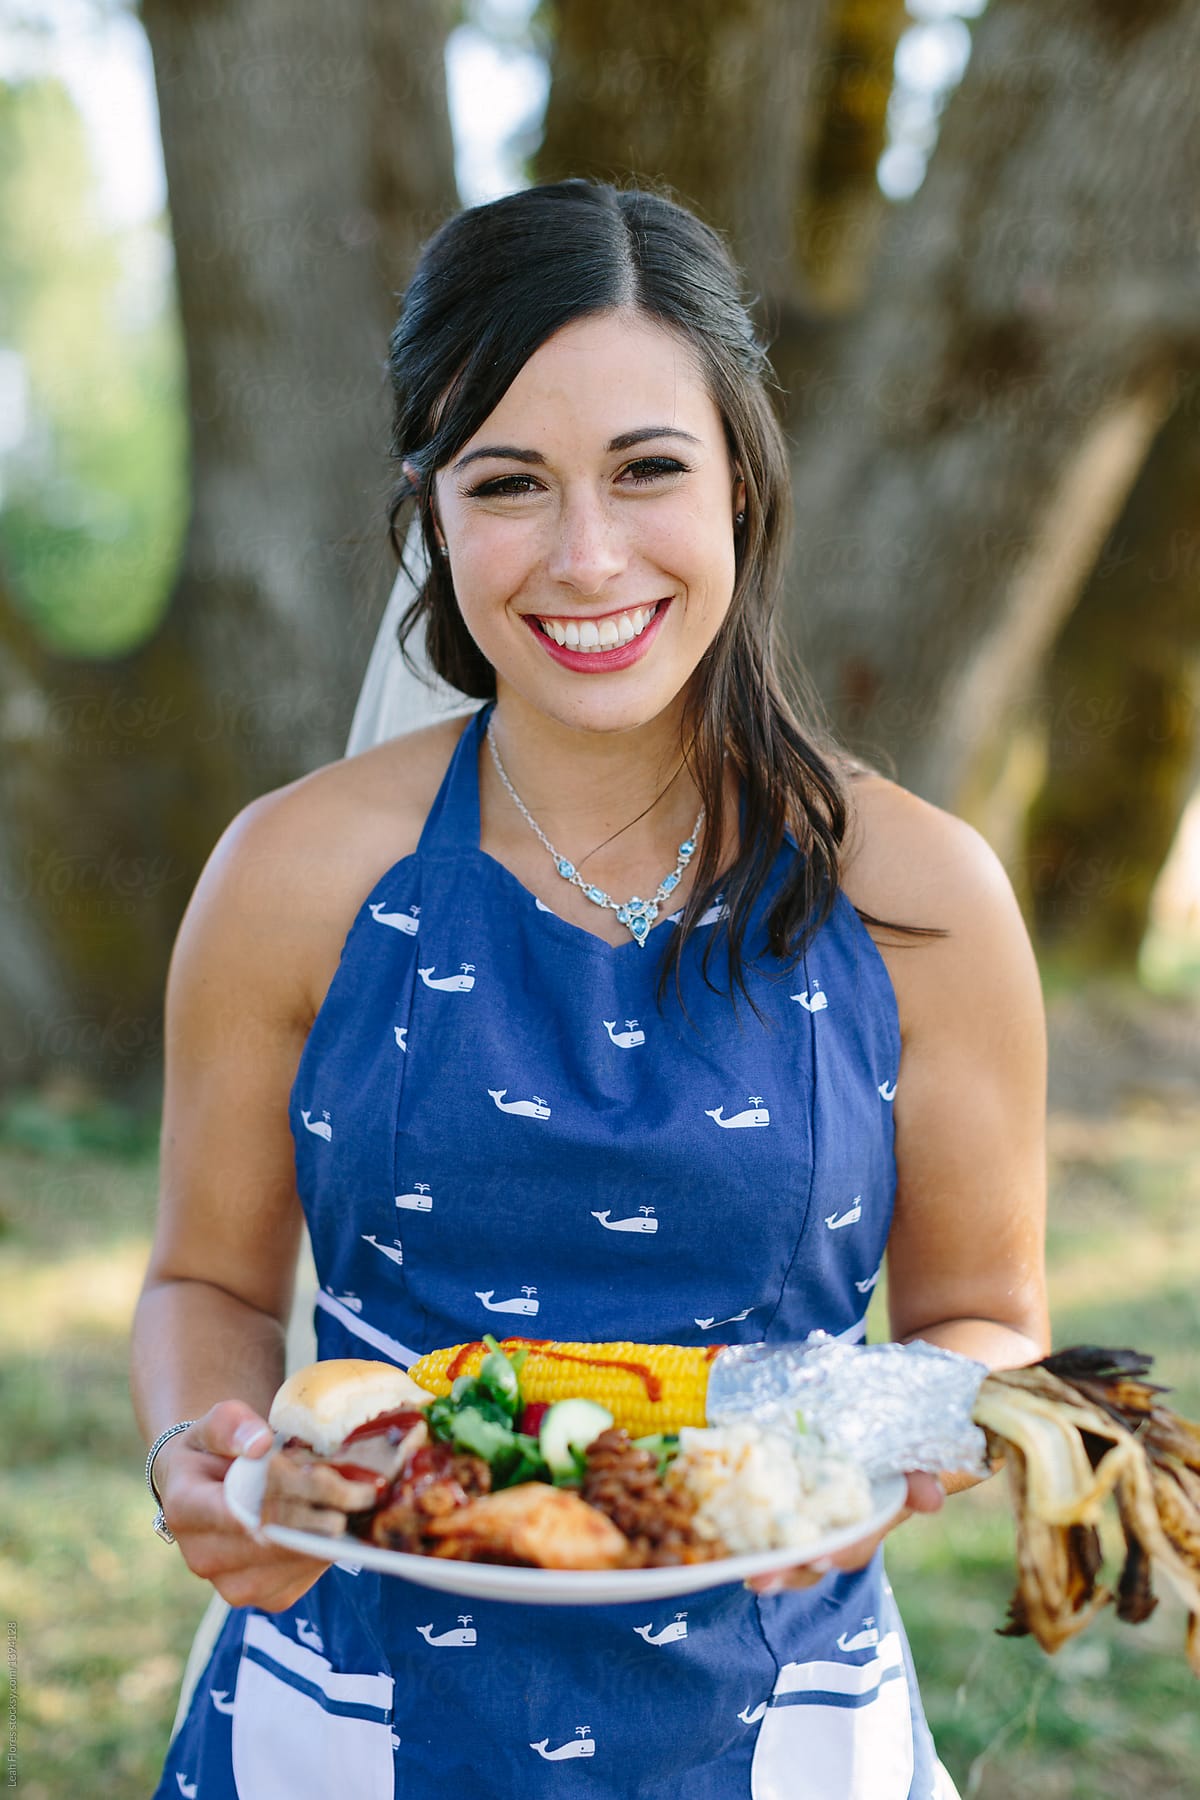 Woman Holding Plate Of Barbecue Food While Wearing Cute Whale Apron by Stocksy  Contributor Leah Flores - Stocksy